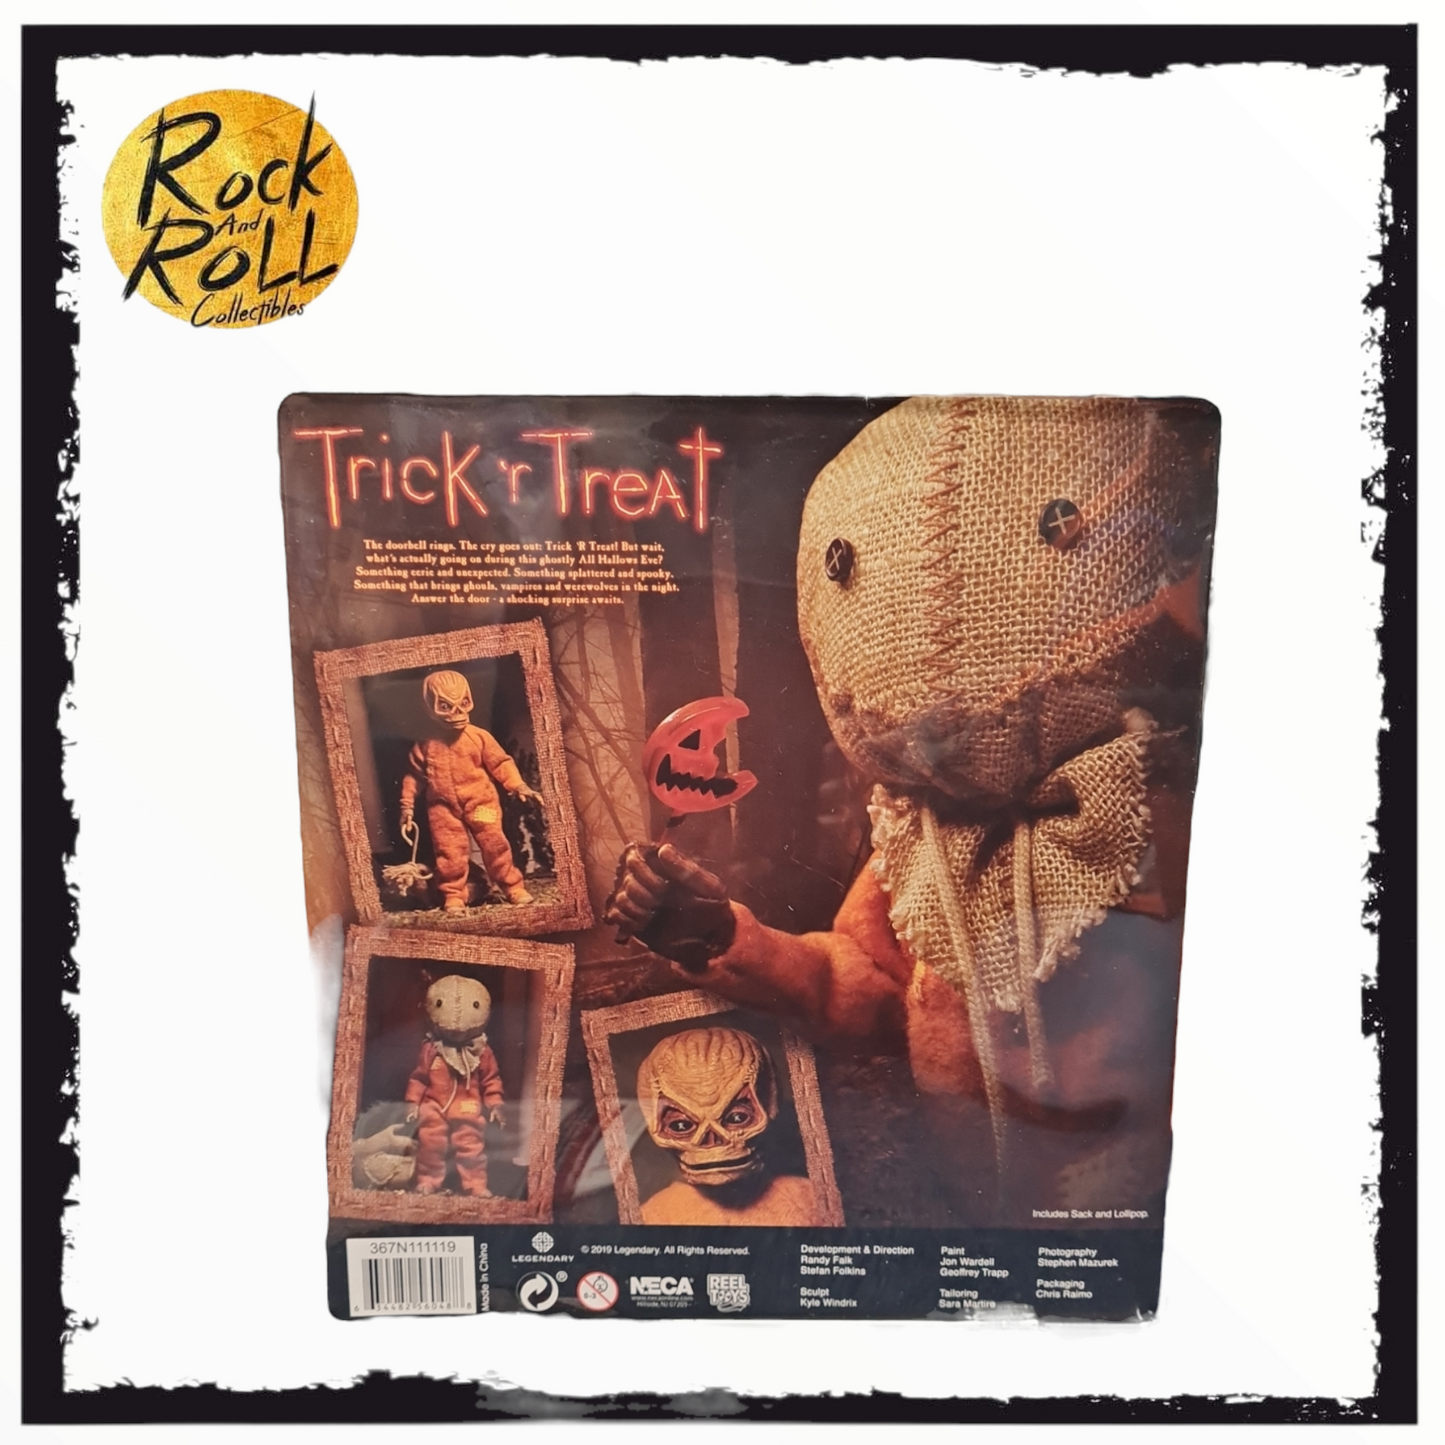 Trick 'r Treat Sam 8" NECA Action Figure Signed By Quinn Lord w/JSA COA